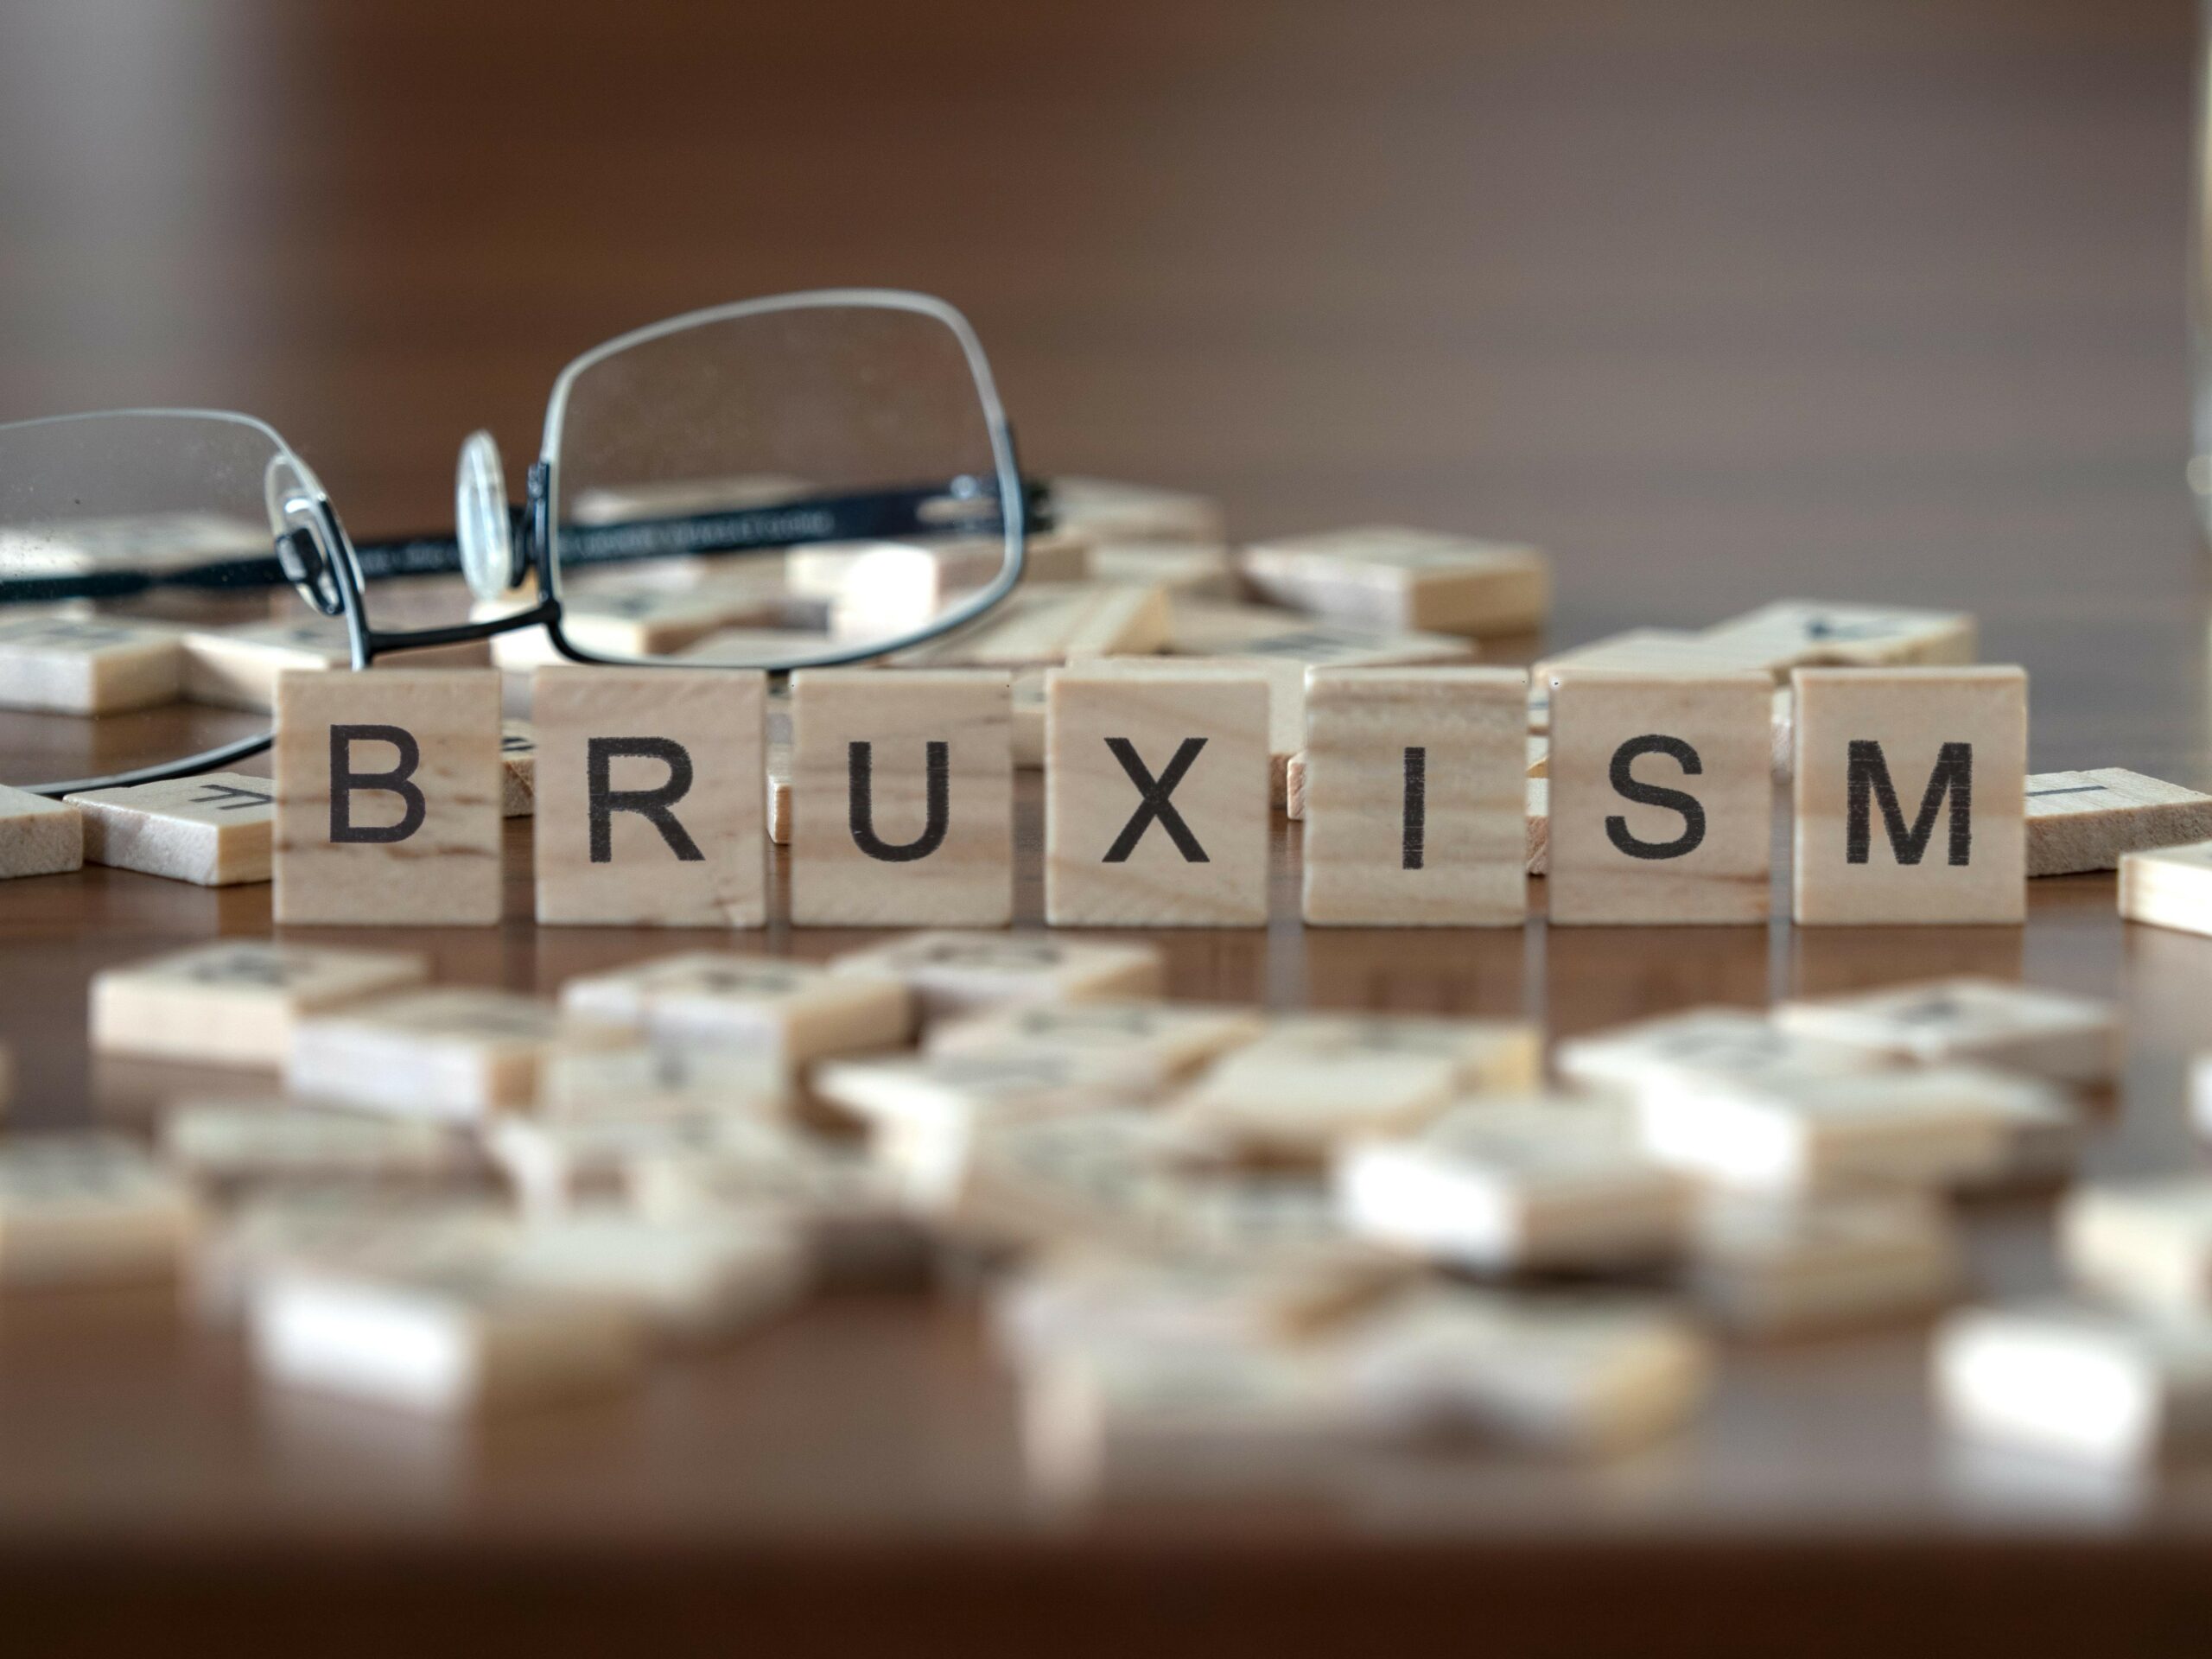 bruxism concept represented by wooden letter tiles on a wooden table with glasses and a book